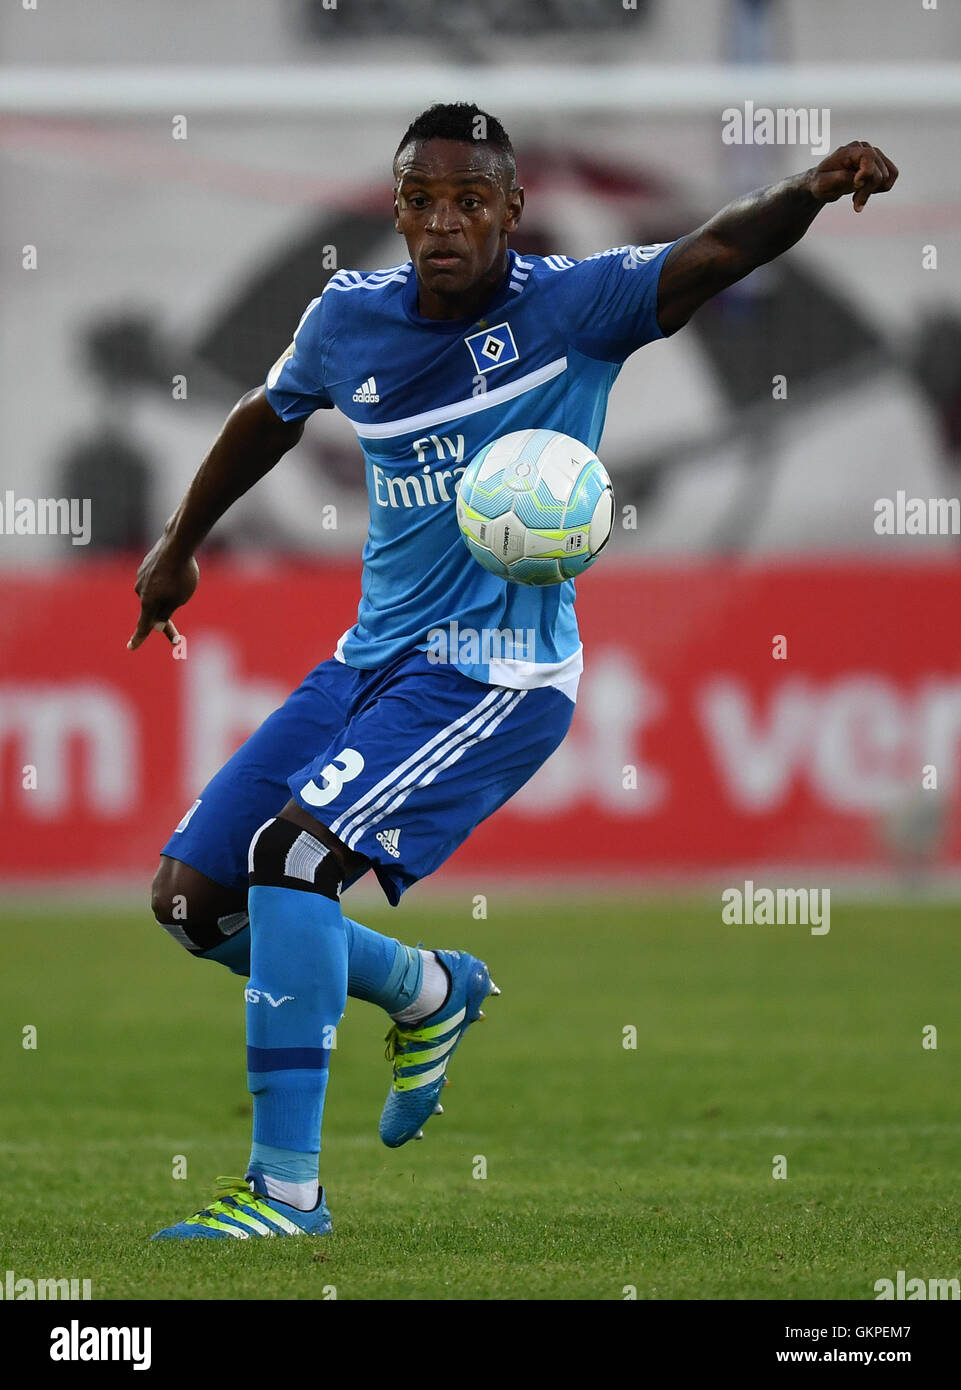 Zwickau, Germany. 22nd Aug, 2016. Hamburg's Cleber Reis in action during the DFB Cup 1st round football match between FSV Zwickau and Hamburger SV in Zwickau, Germany, 22 August 2016. PHOTO: HENDRIK SCHMIDT/DPA/Alamy Live News Stock Photo